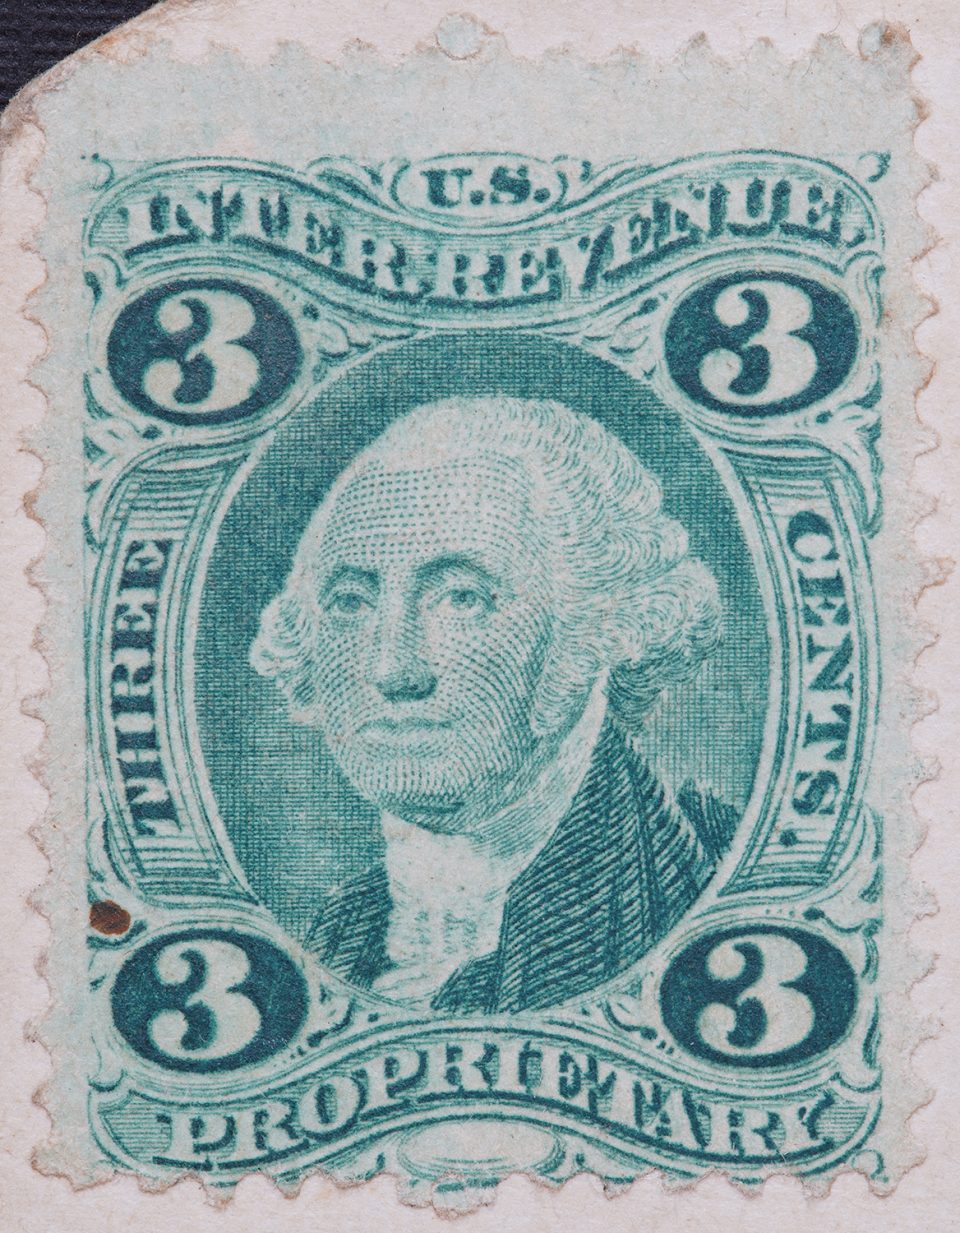 High resolution photograph of an 1864-66 U.S. tax stamp, used to pay for the cost of the U.S. Civil War. Stamps like this were affixed to photographs for two years. This is a generic 3-cent tax stamp that says "Proprietary."